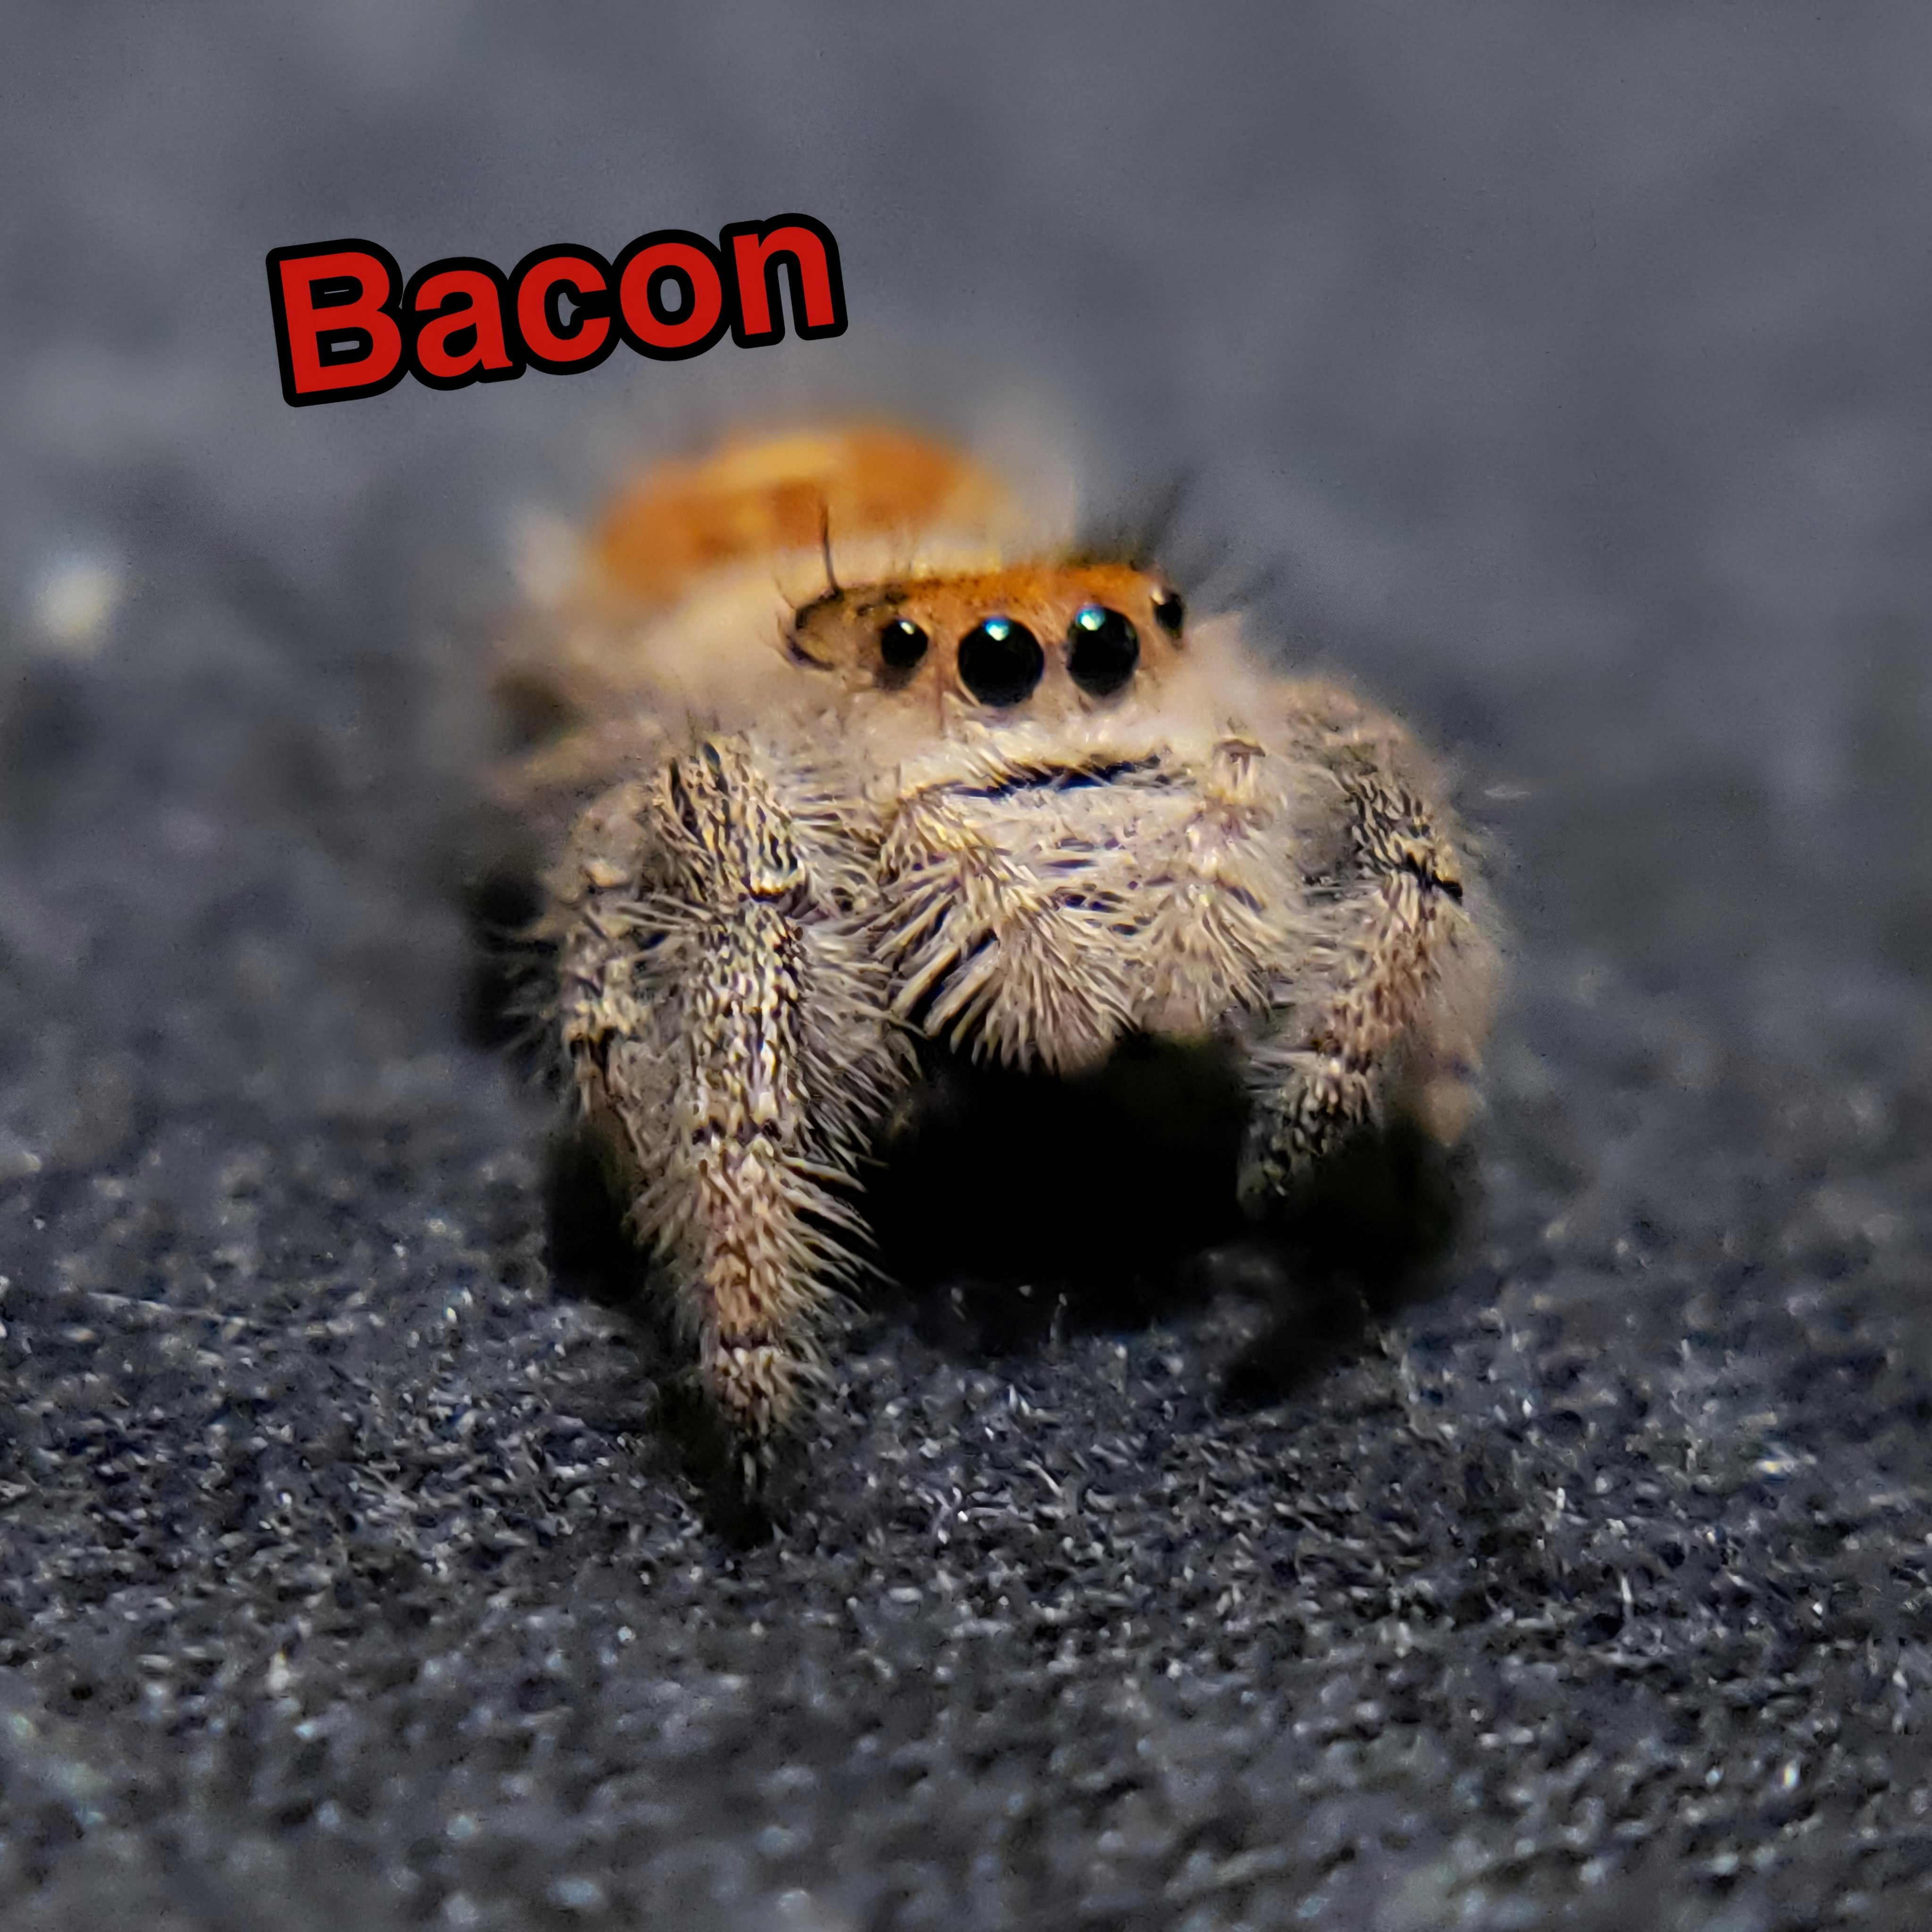 Regal Jumping Spider "Bacon" - Jumping Spiders For Sale - Spiders Source - #1 Regal Jumping Spider Store